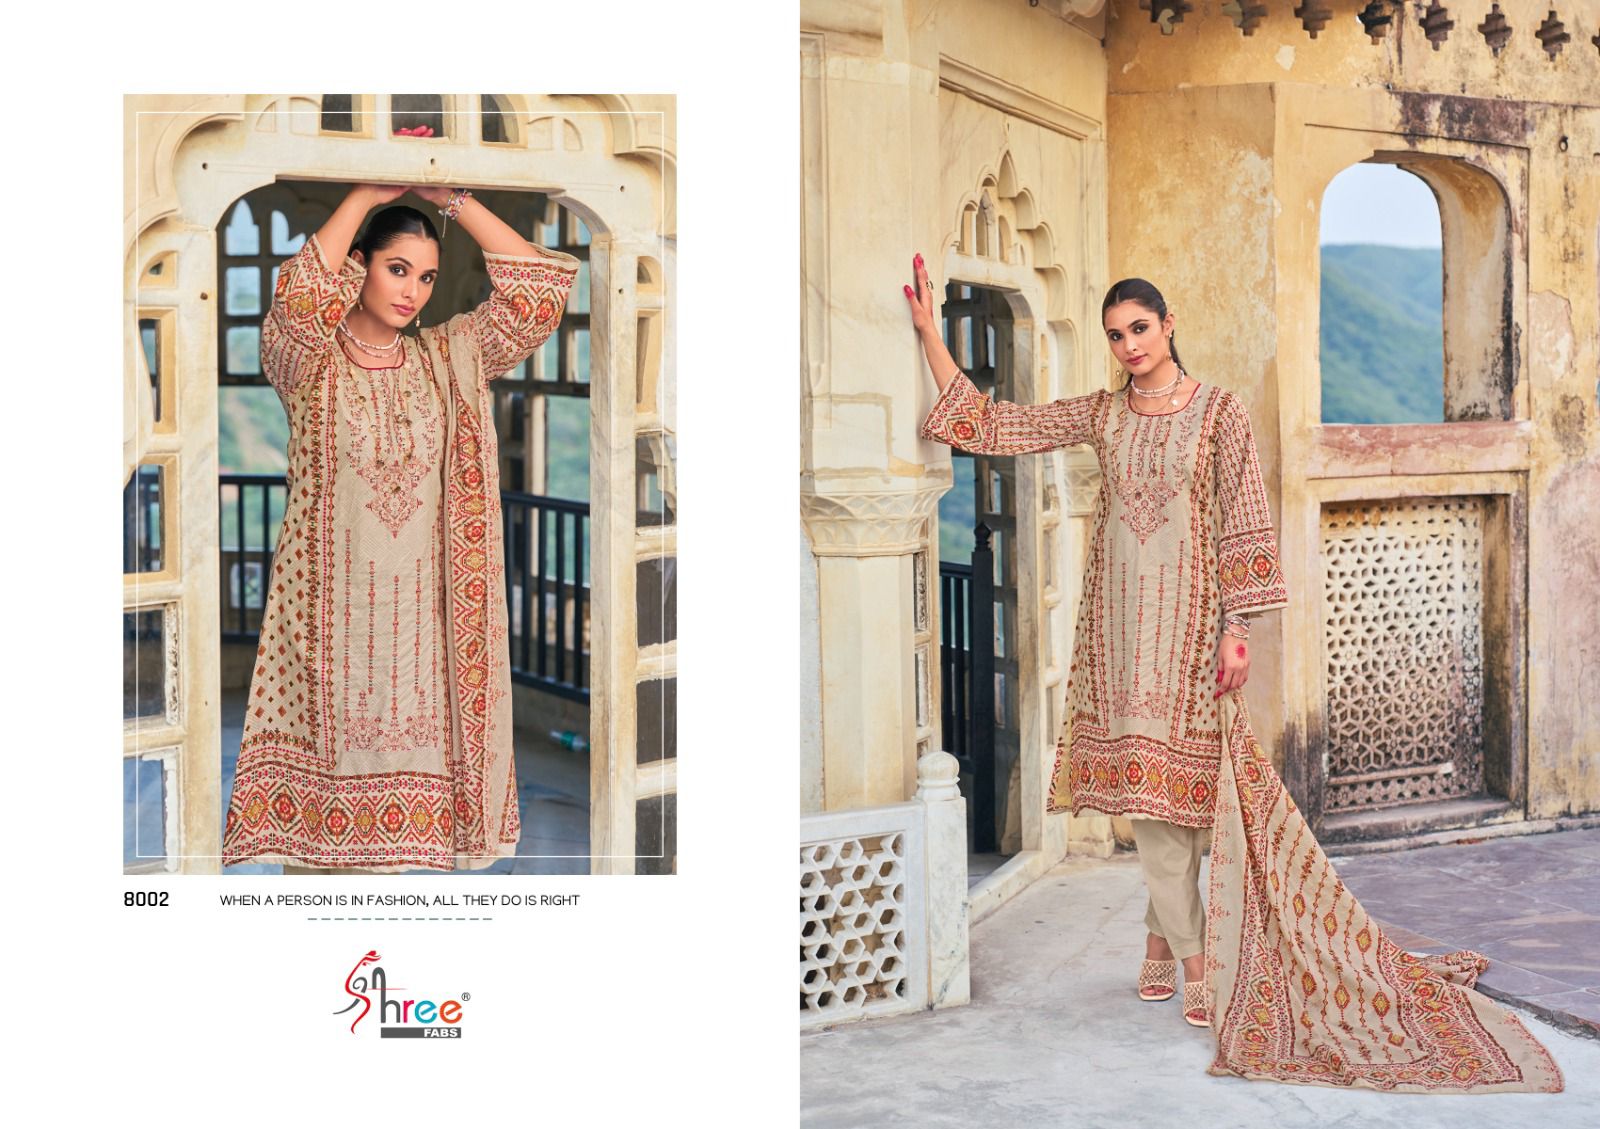 Shree fabs Bin saeed lawn collection vol 8 lawn cotton with self embroidery work pakistani dress wholesaler - jilaniwholesalesuit